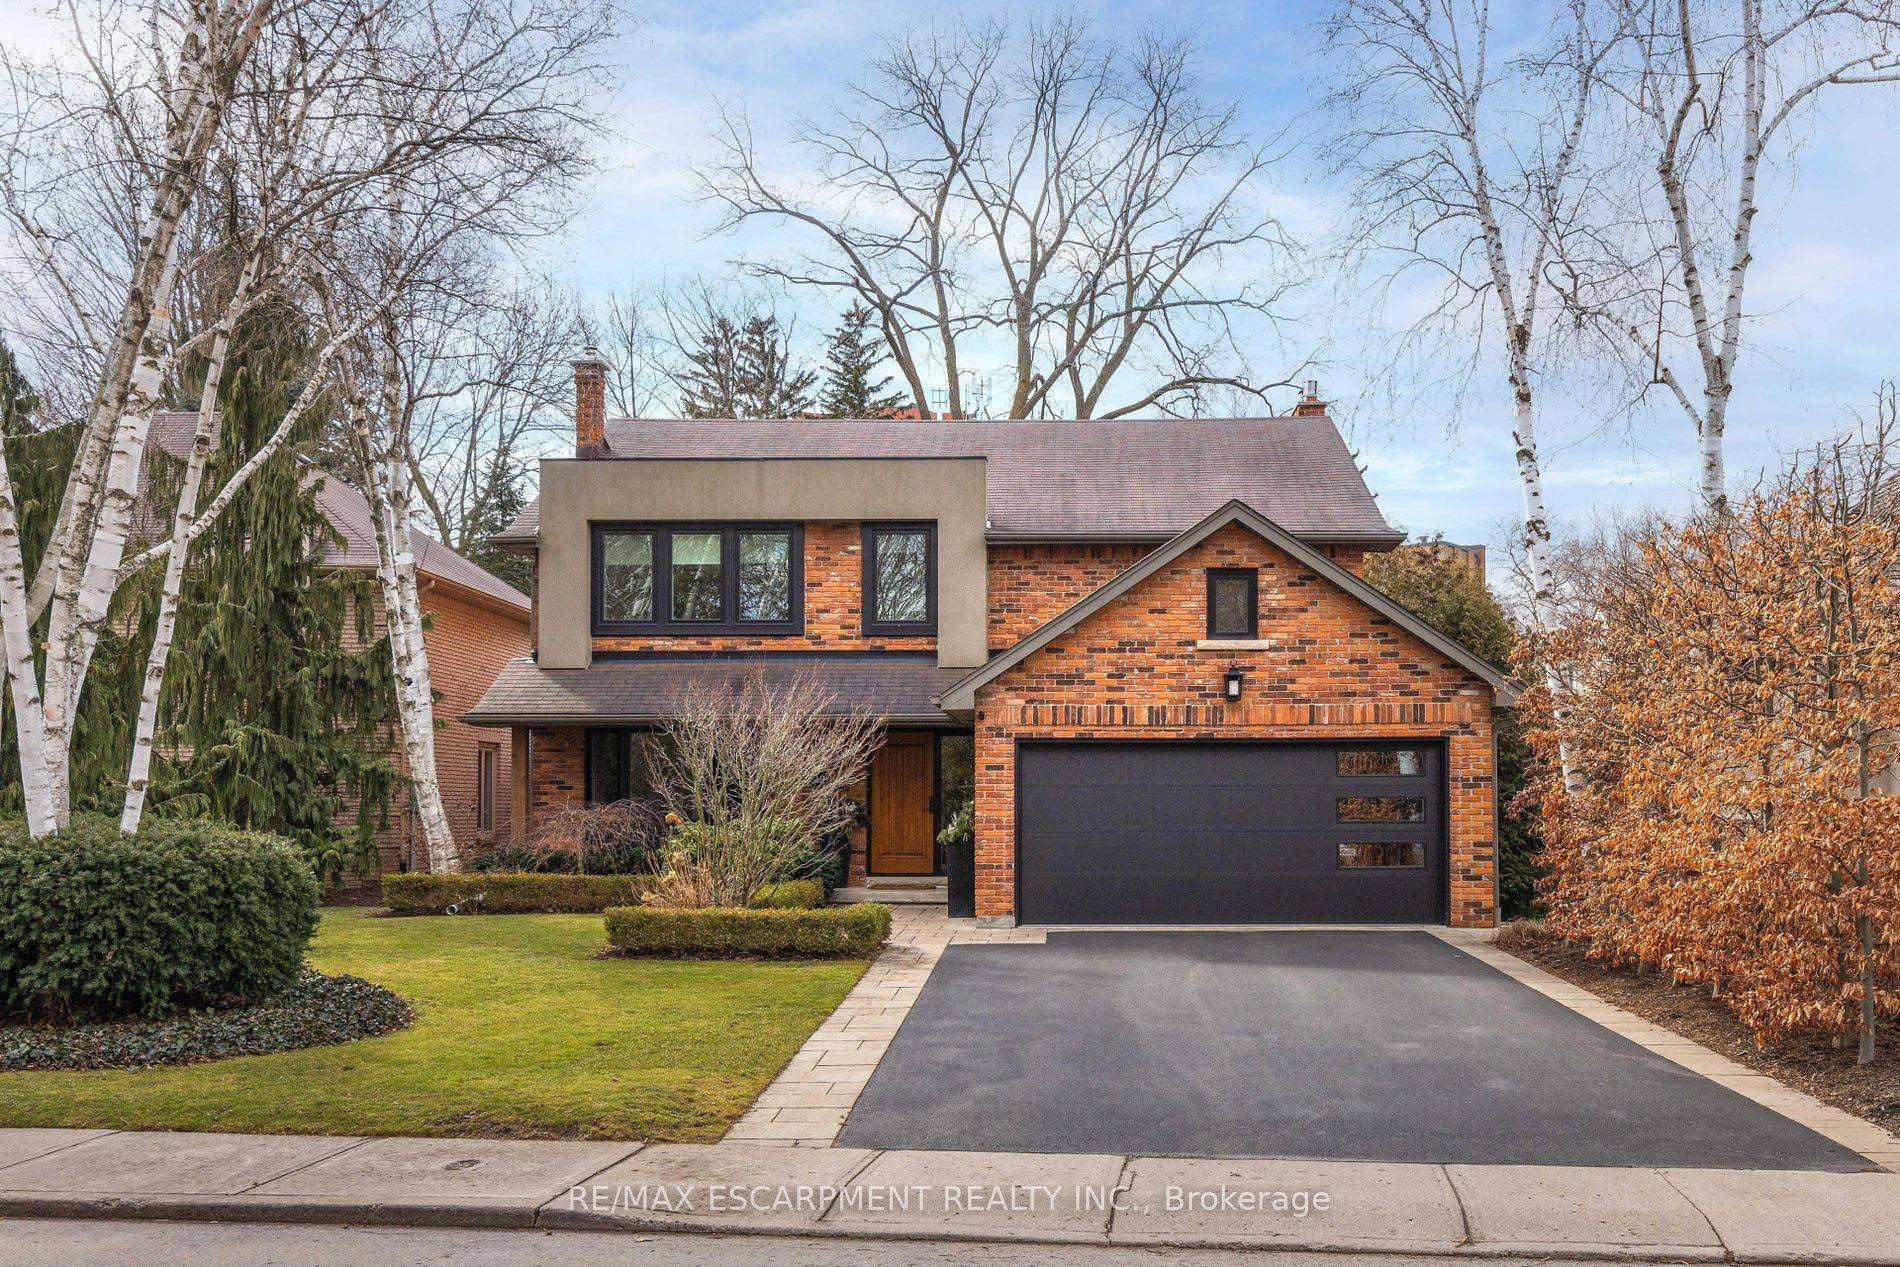 122 Watson Ave updated family home situated on a 50x150ft lot in the heart of Old Oakville, Full renovation by John Willmott, has a contemporary design, timeless sophistication.